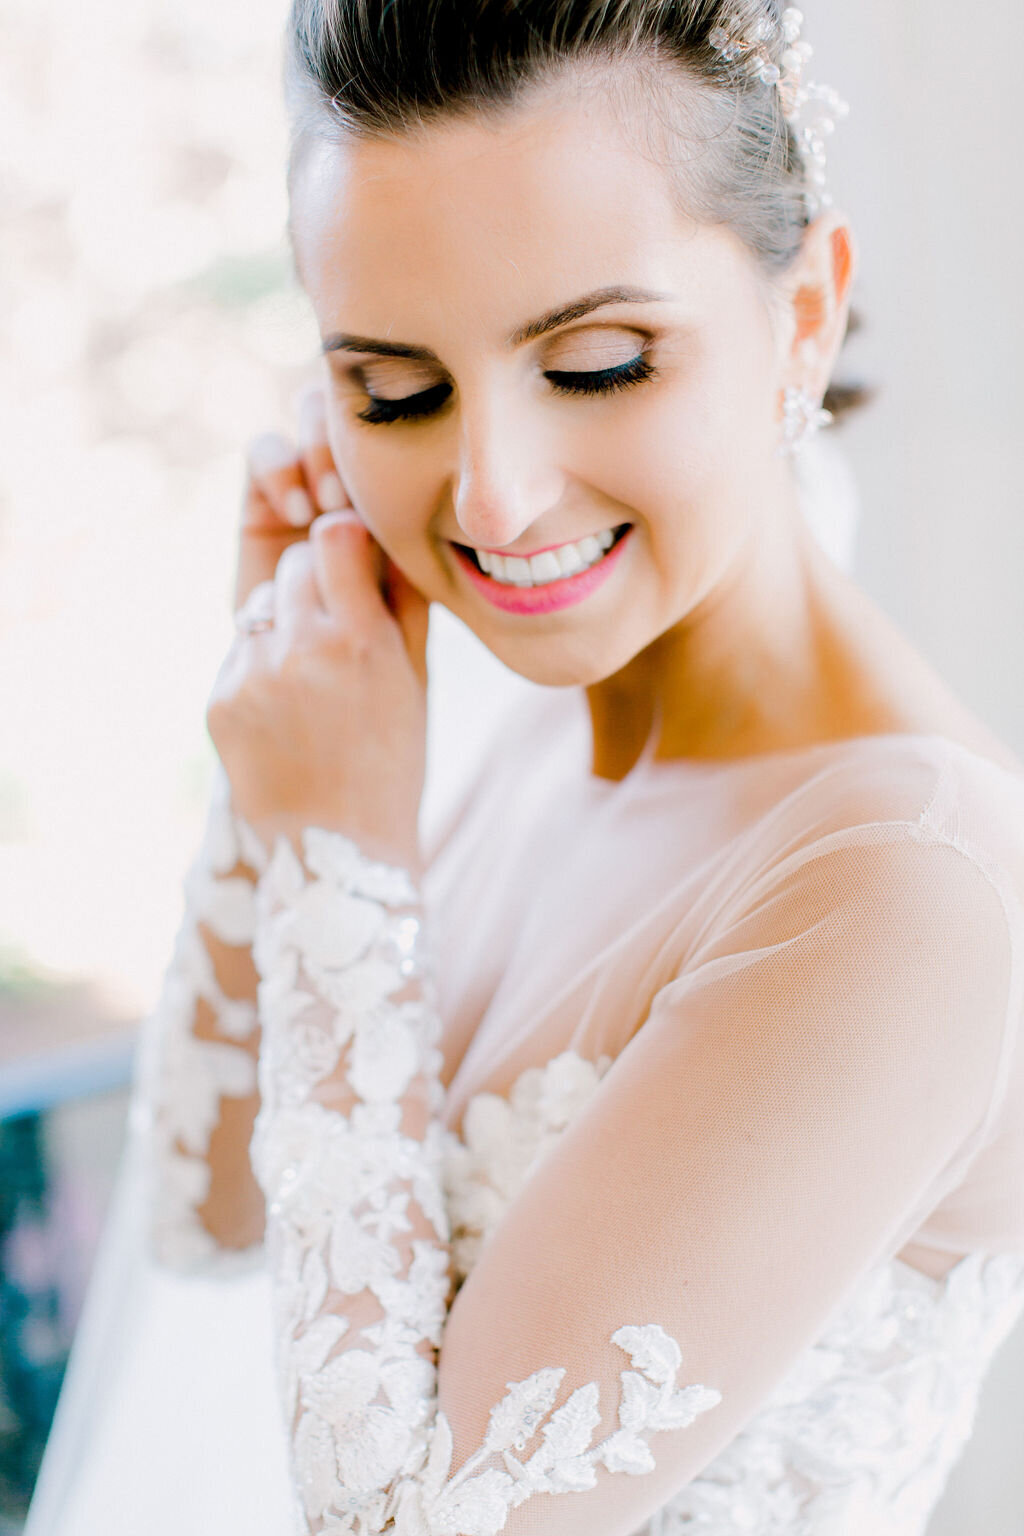 Intimate moment of the bride preparing for her big day, with focus on her thoughtful expression and beautiful details of her bridal attire